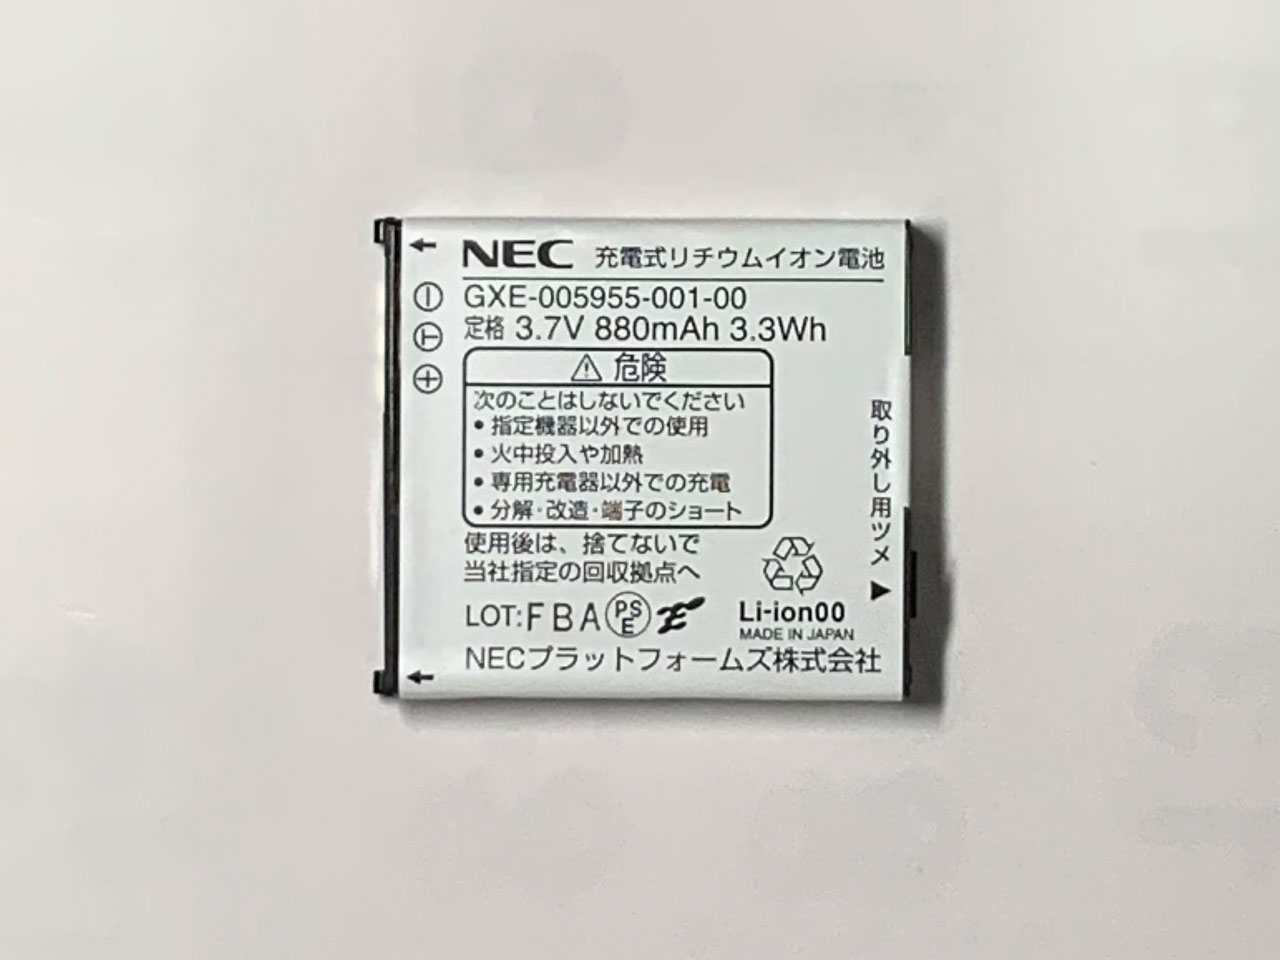 NEC Carrity-NX (PS9D-NX) GXE-005955-001-00 電池パック